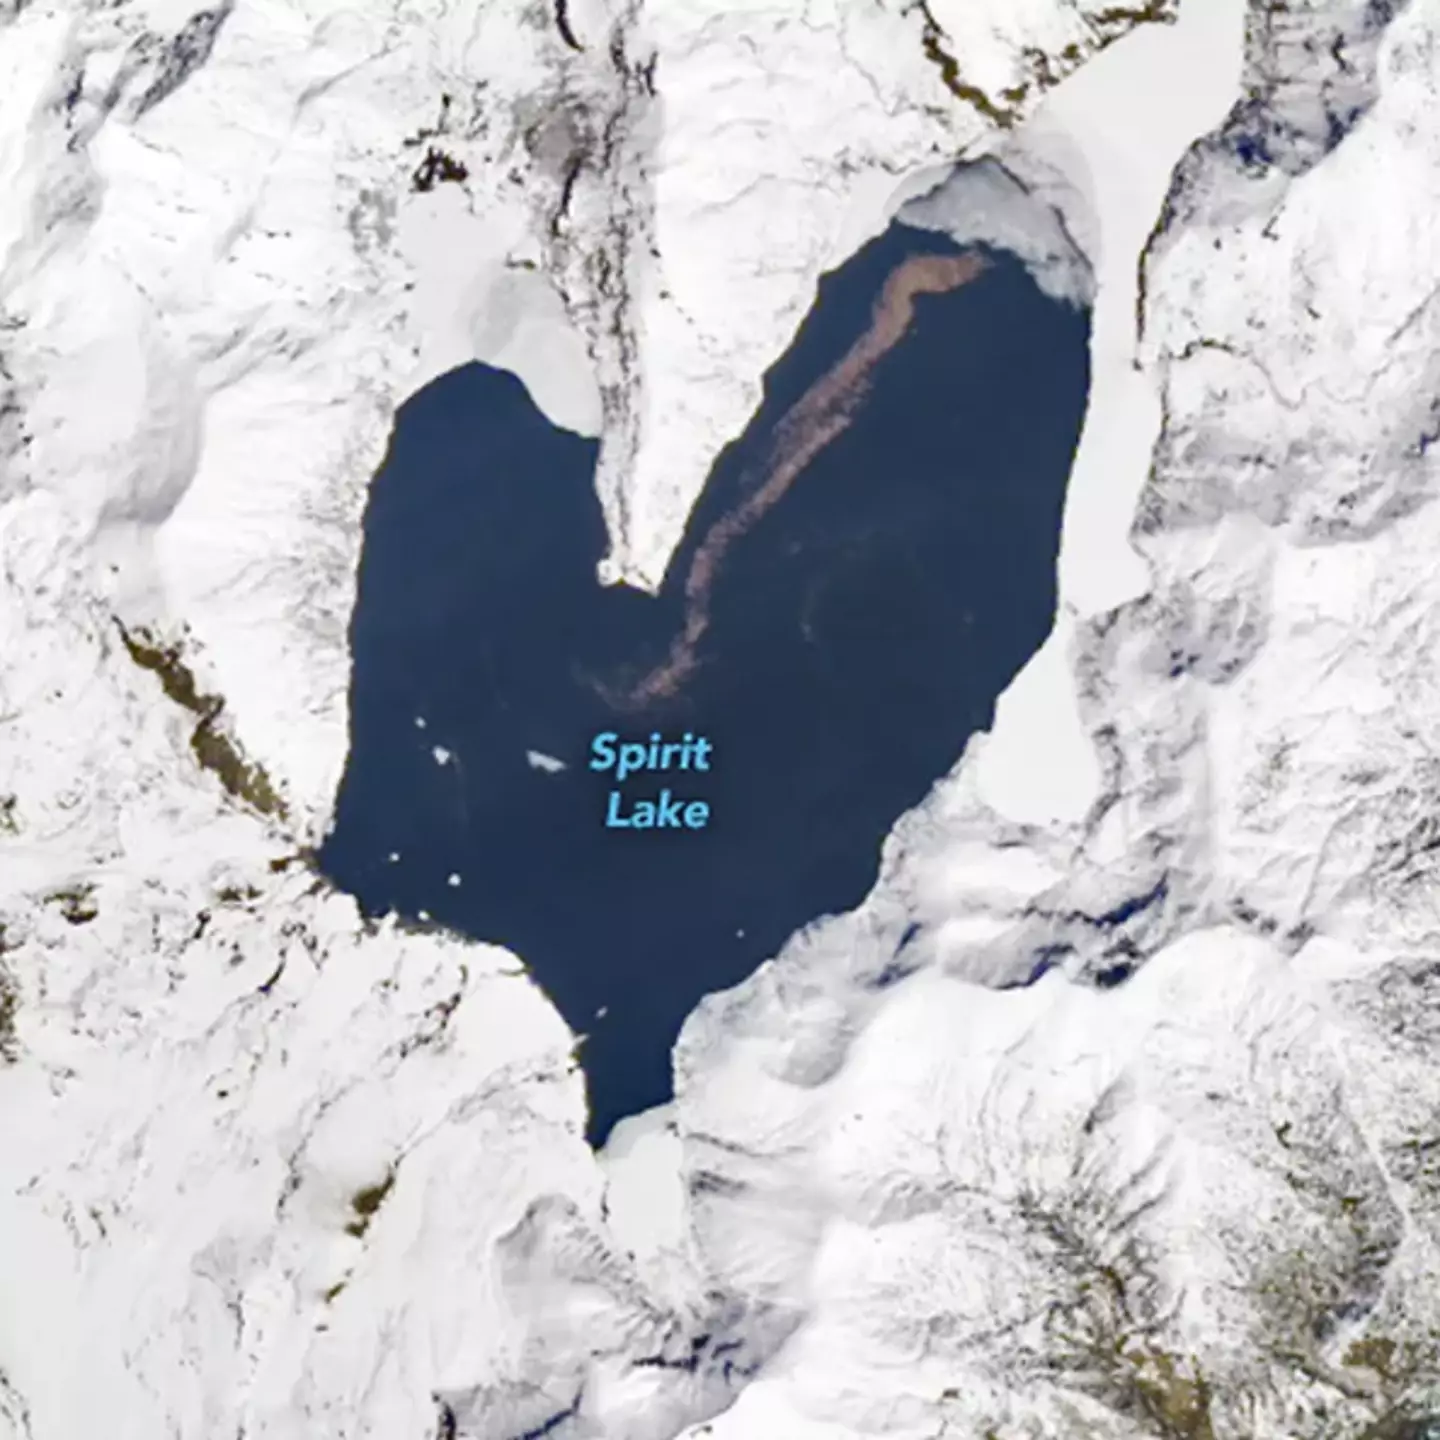 Heart shaped lake in Washington has a deadly history behind it